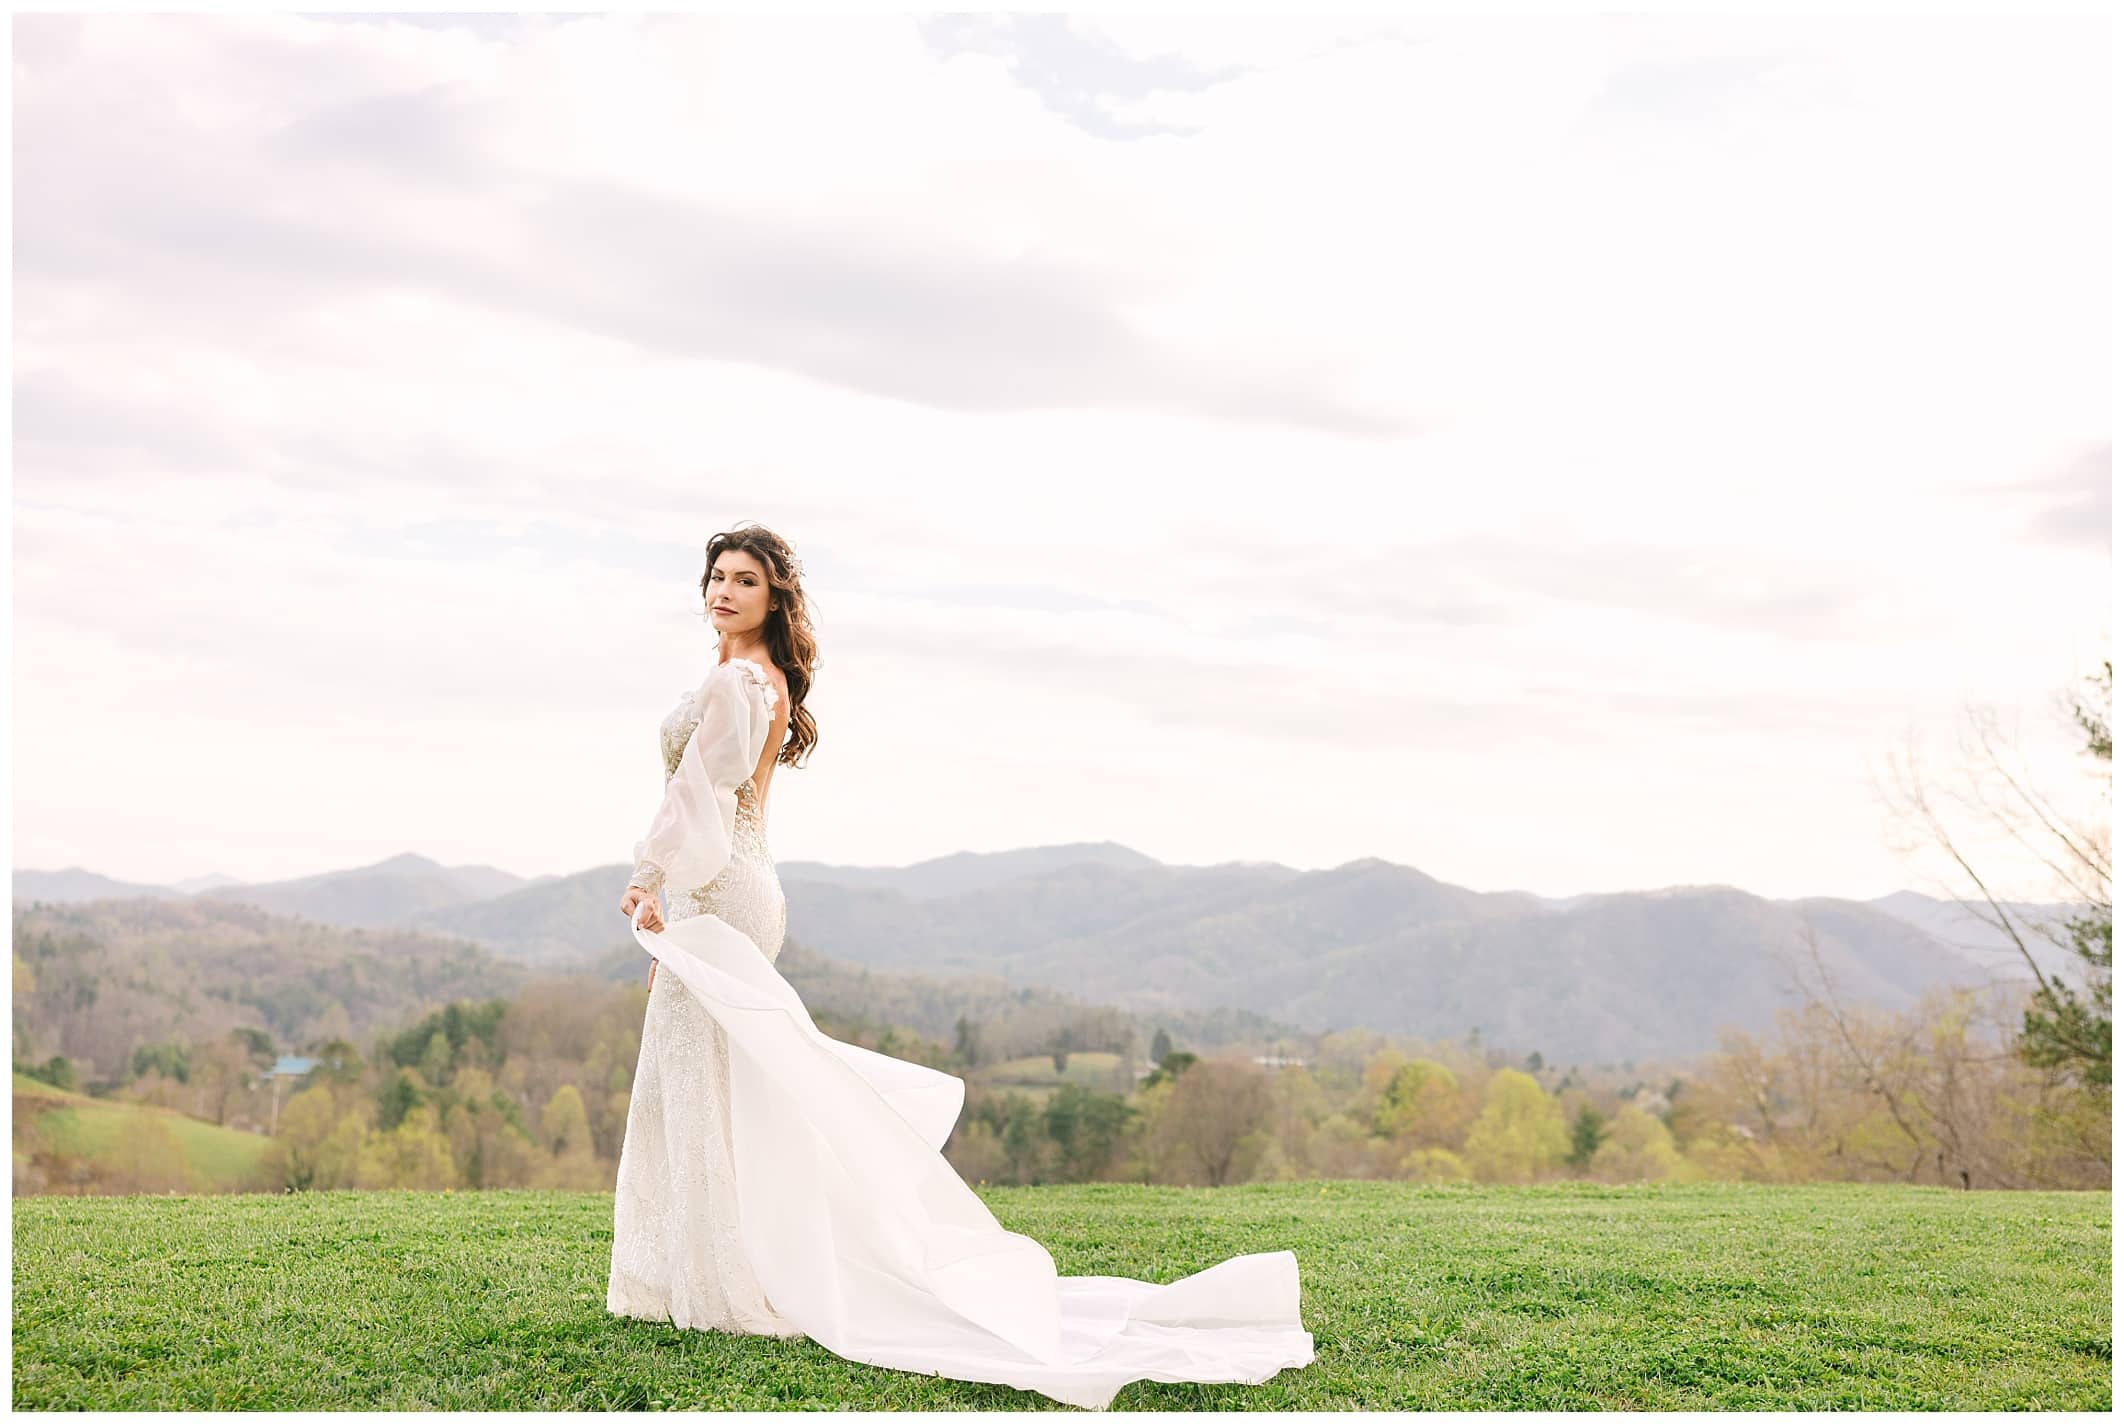 Custom wedding dress with puffy long sleeves, mermaid style and lace detail designed by Angela Kim Couture. Capture at The Ridge just outside of Asheville, North Carolina by Kathy Beaver Photography, a NC wedding photographer.